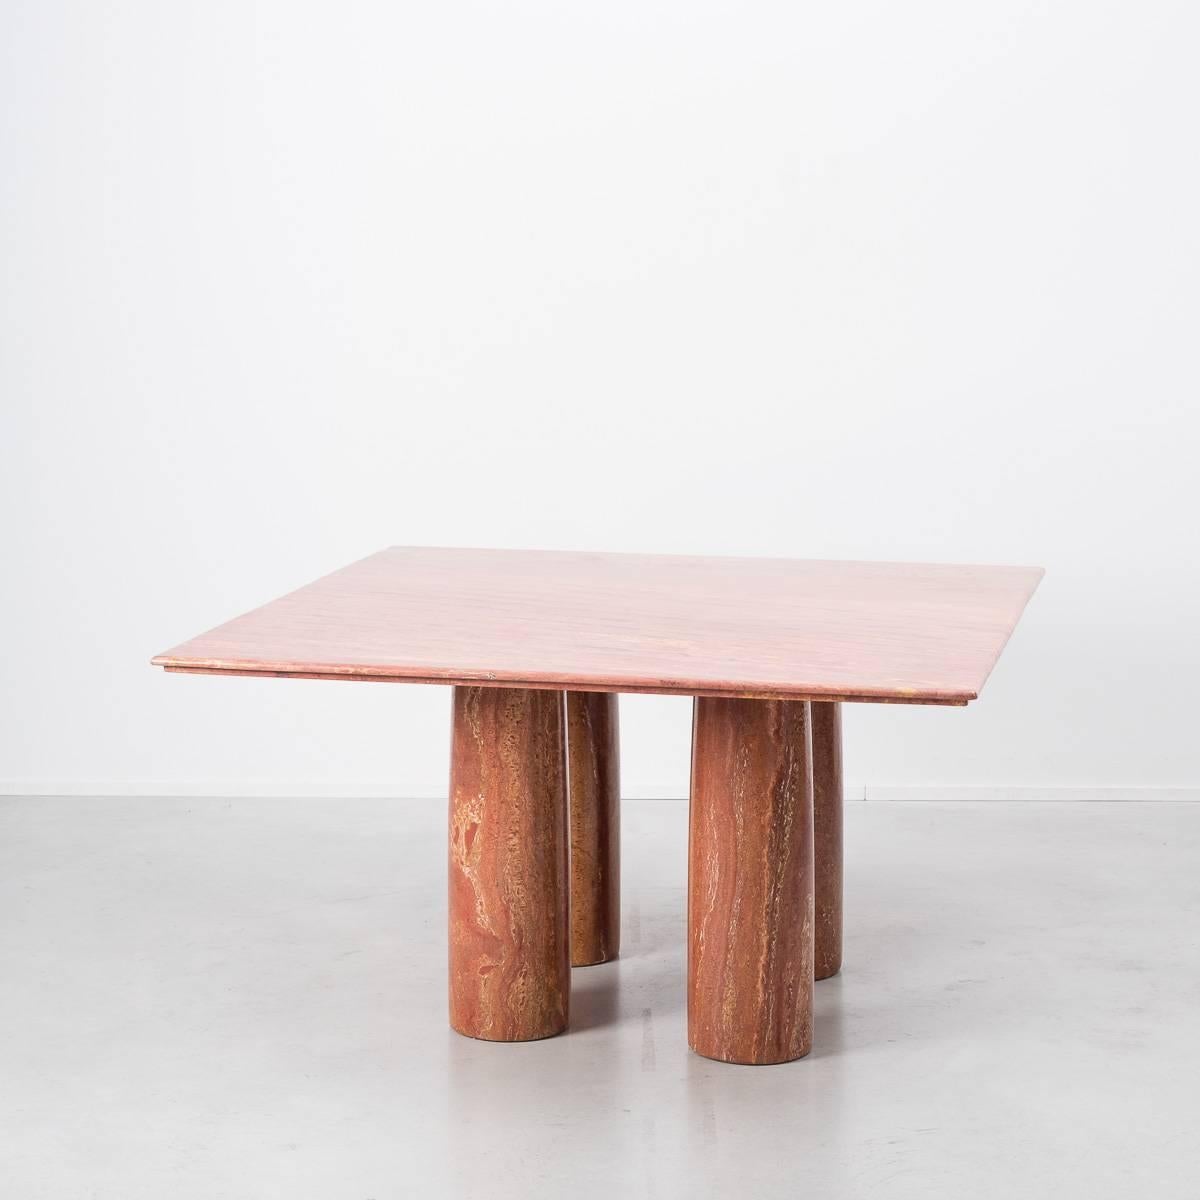 This stunning minimalist table designed by Milanese architect Mario Bellini is made purely from one material, solid red travertine marble. A square top with a reversed step edge profile sits elegantly on four cylindrical columns. This table is a